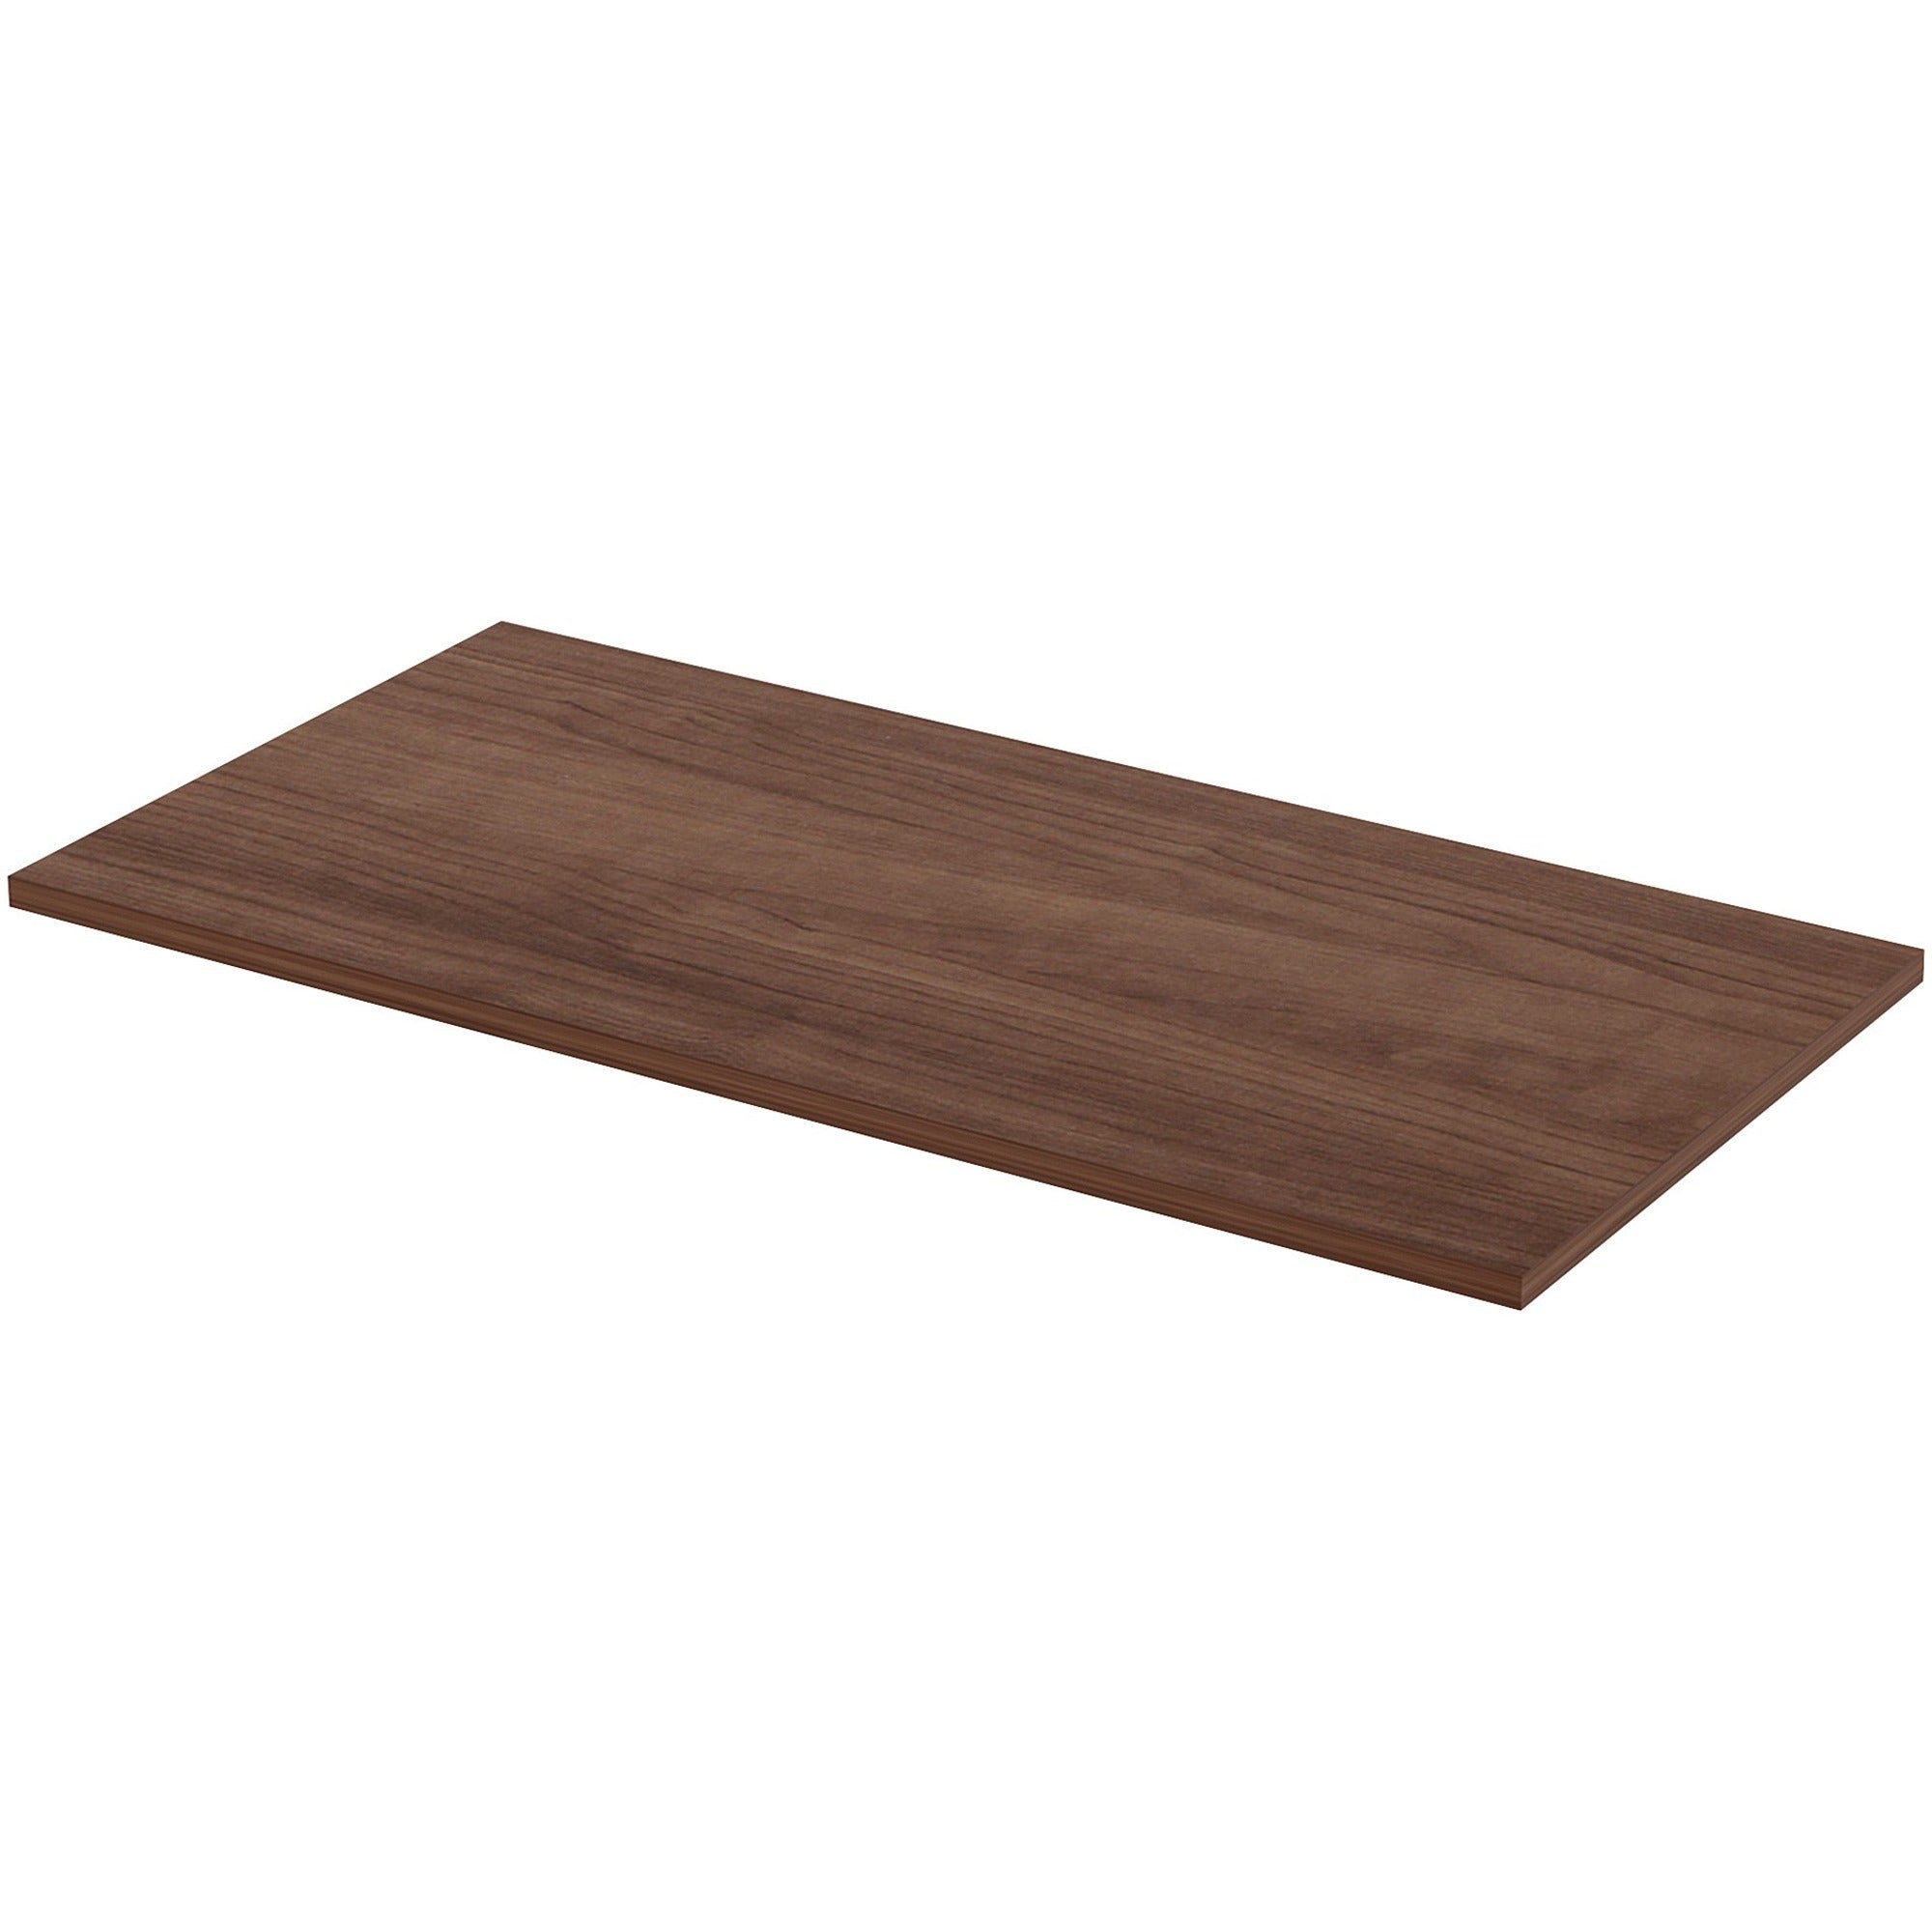 lorell-relevance-series-tabletop-for-table-topwalnut-rectangle-laminated-top-48-table-top-length-x-24-table-top-width-x-1-table-top-thickness-assembly-required-1-each_llr59638 - 1